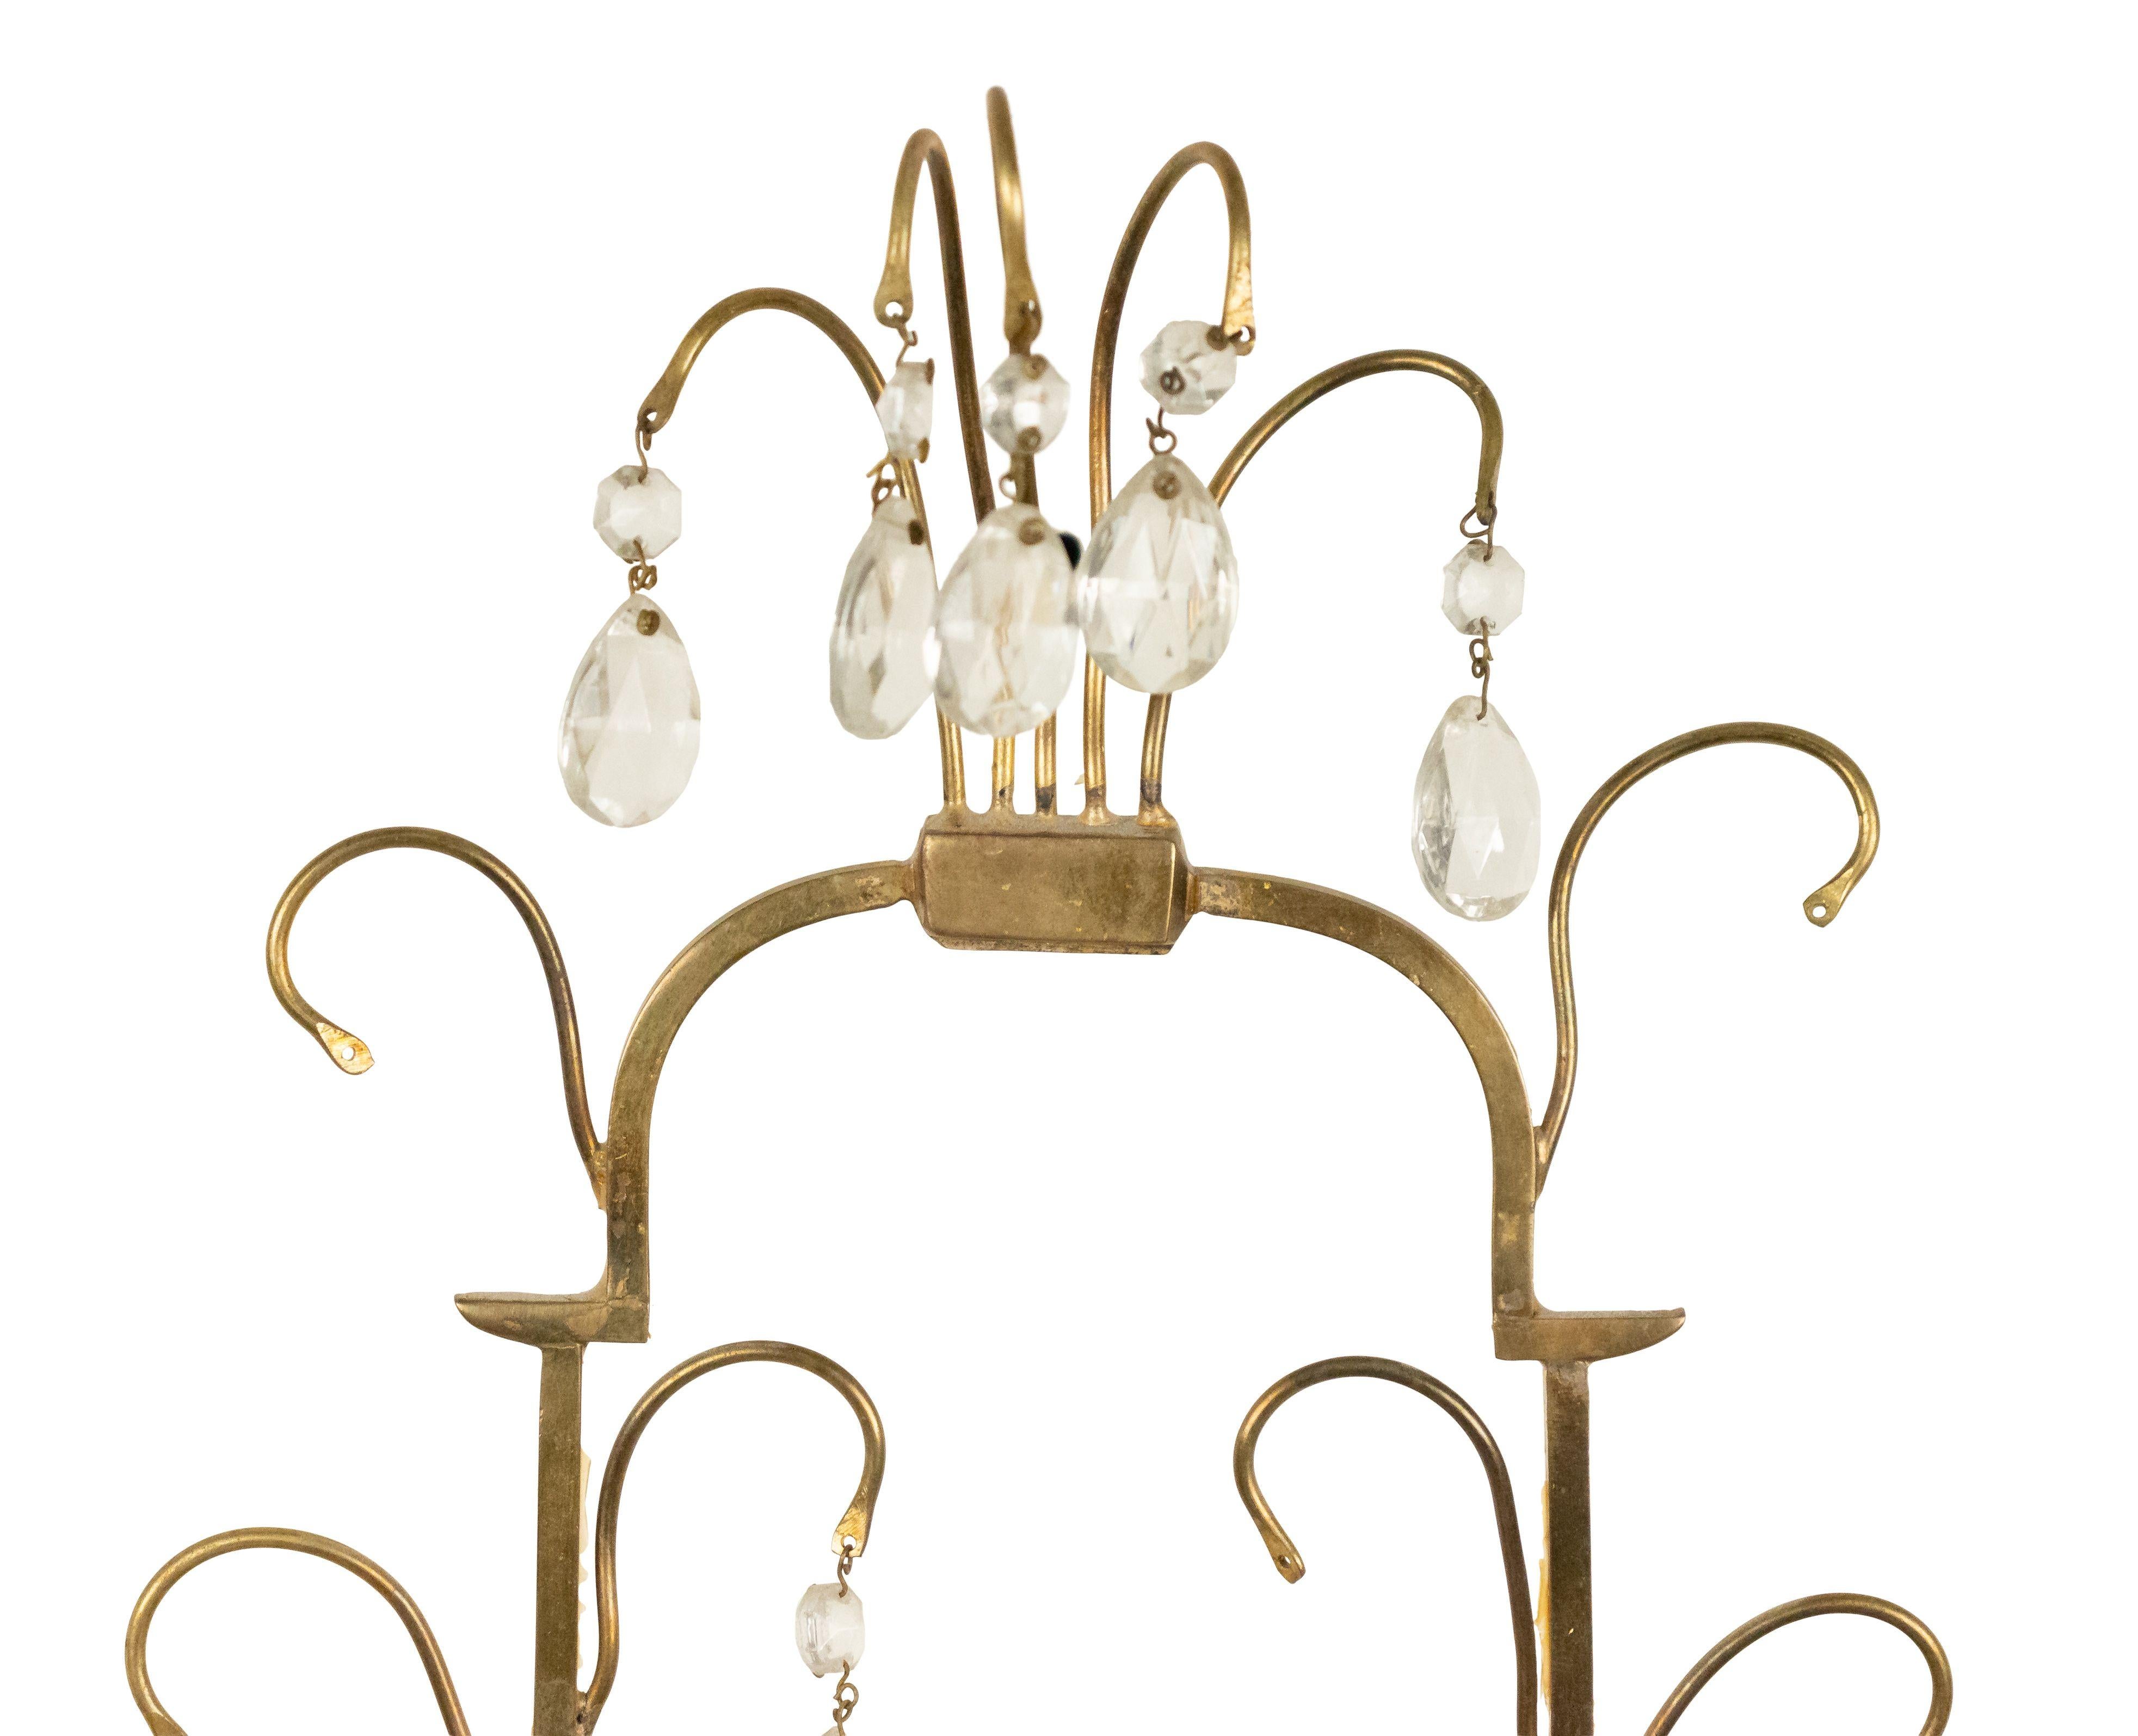 French Victorian 20th century 3 light sconce in gilt bronze with scrolling arms and crystal drops and swags.